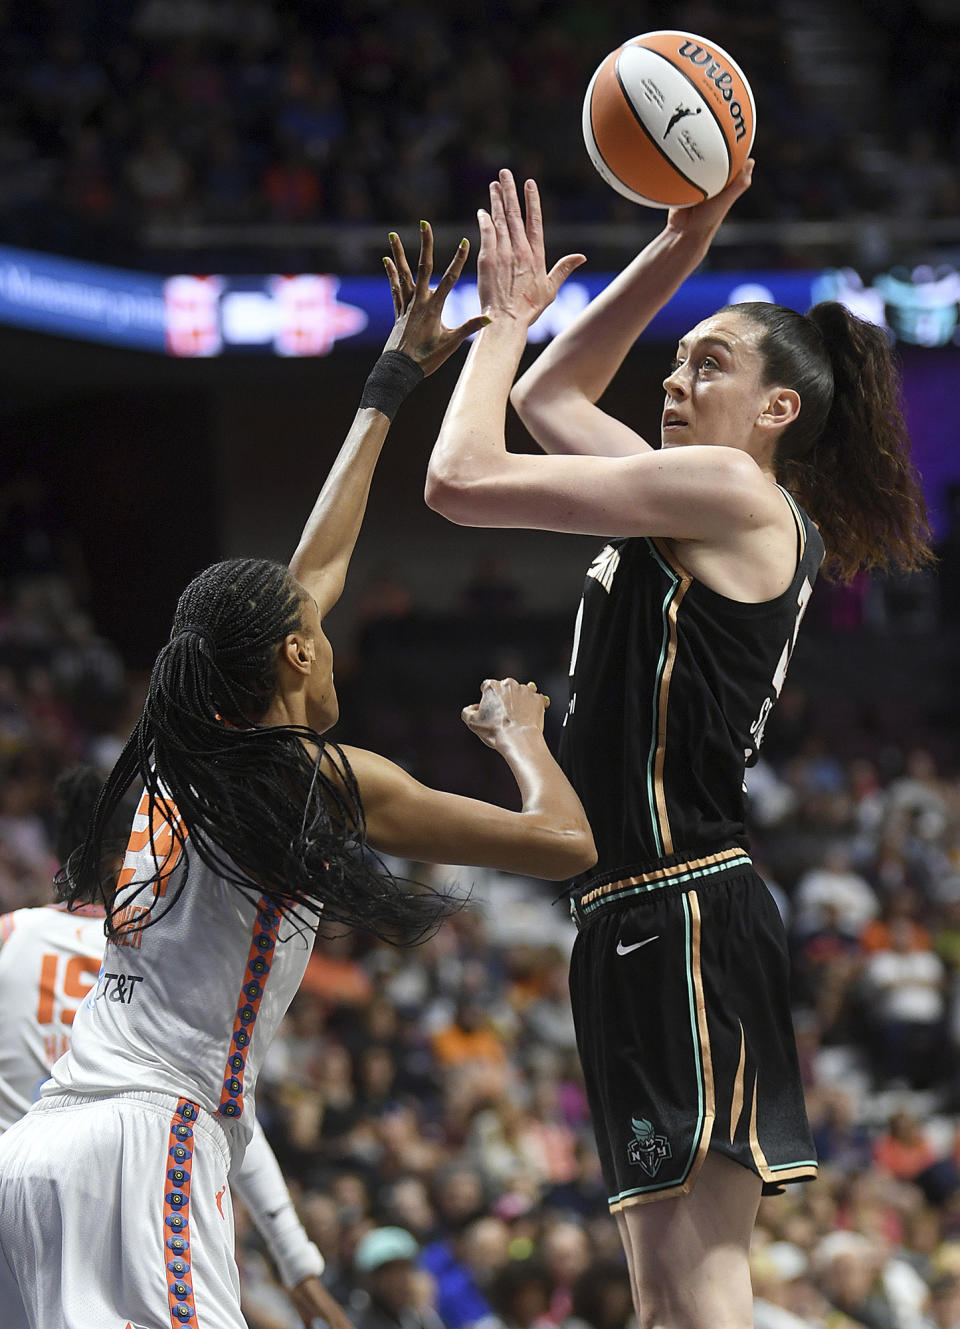 New York Liberty's Breanna Stewart (30) attempts a basket as she is guarded by Connecticut Sun's DeWanna Bonner (24) during the first half of a WNBA basketball game, Tuesday, June 27, 2023 at Mohegan Sun Arena in Uncasville, Conn. (Sarah Gordon/The Day via AP)